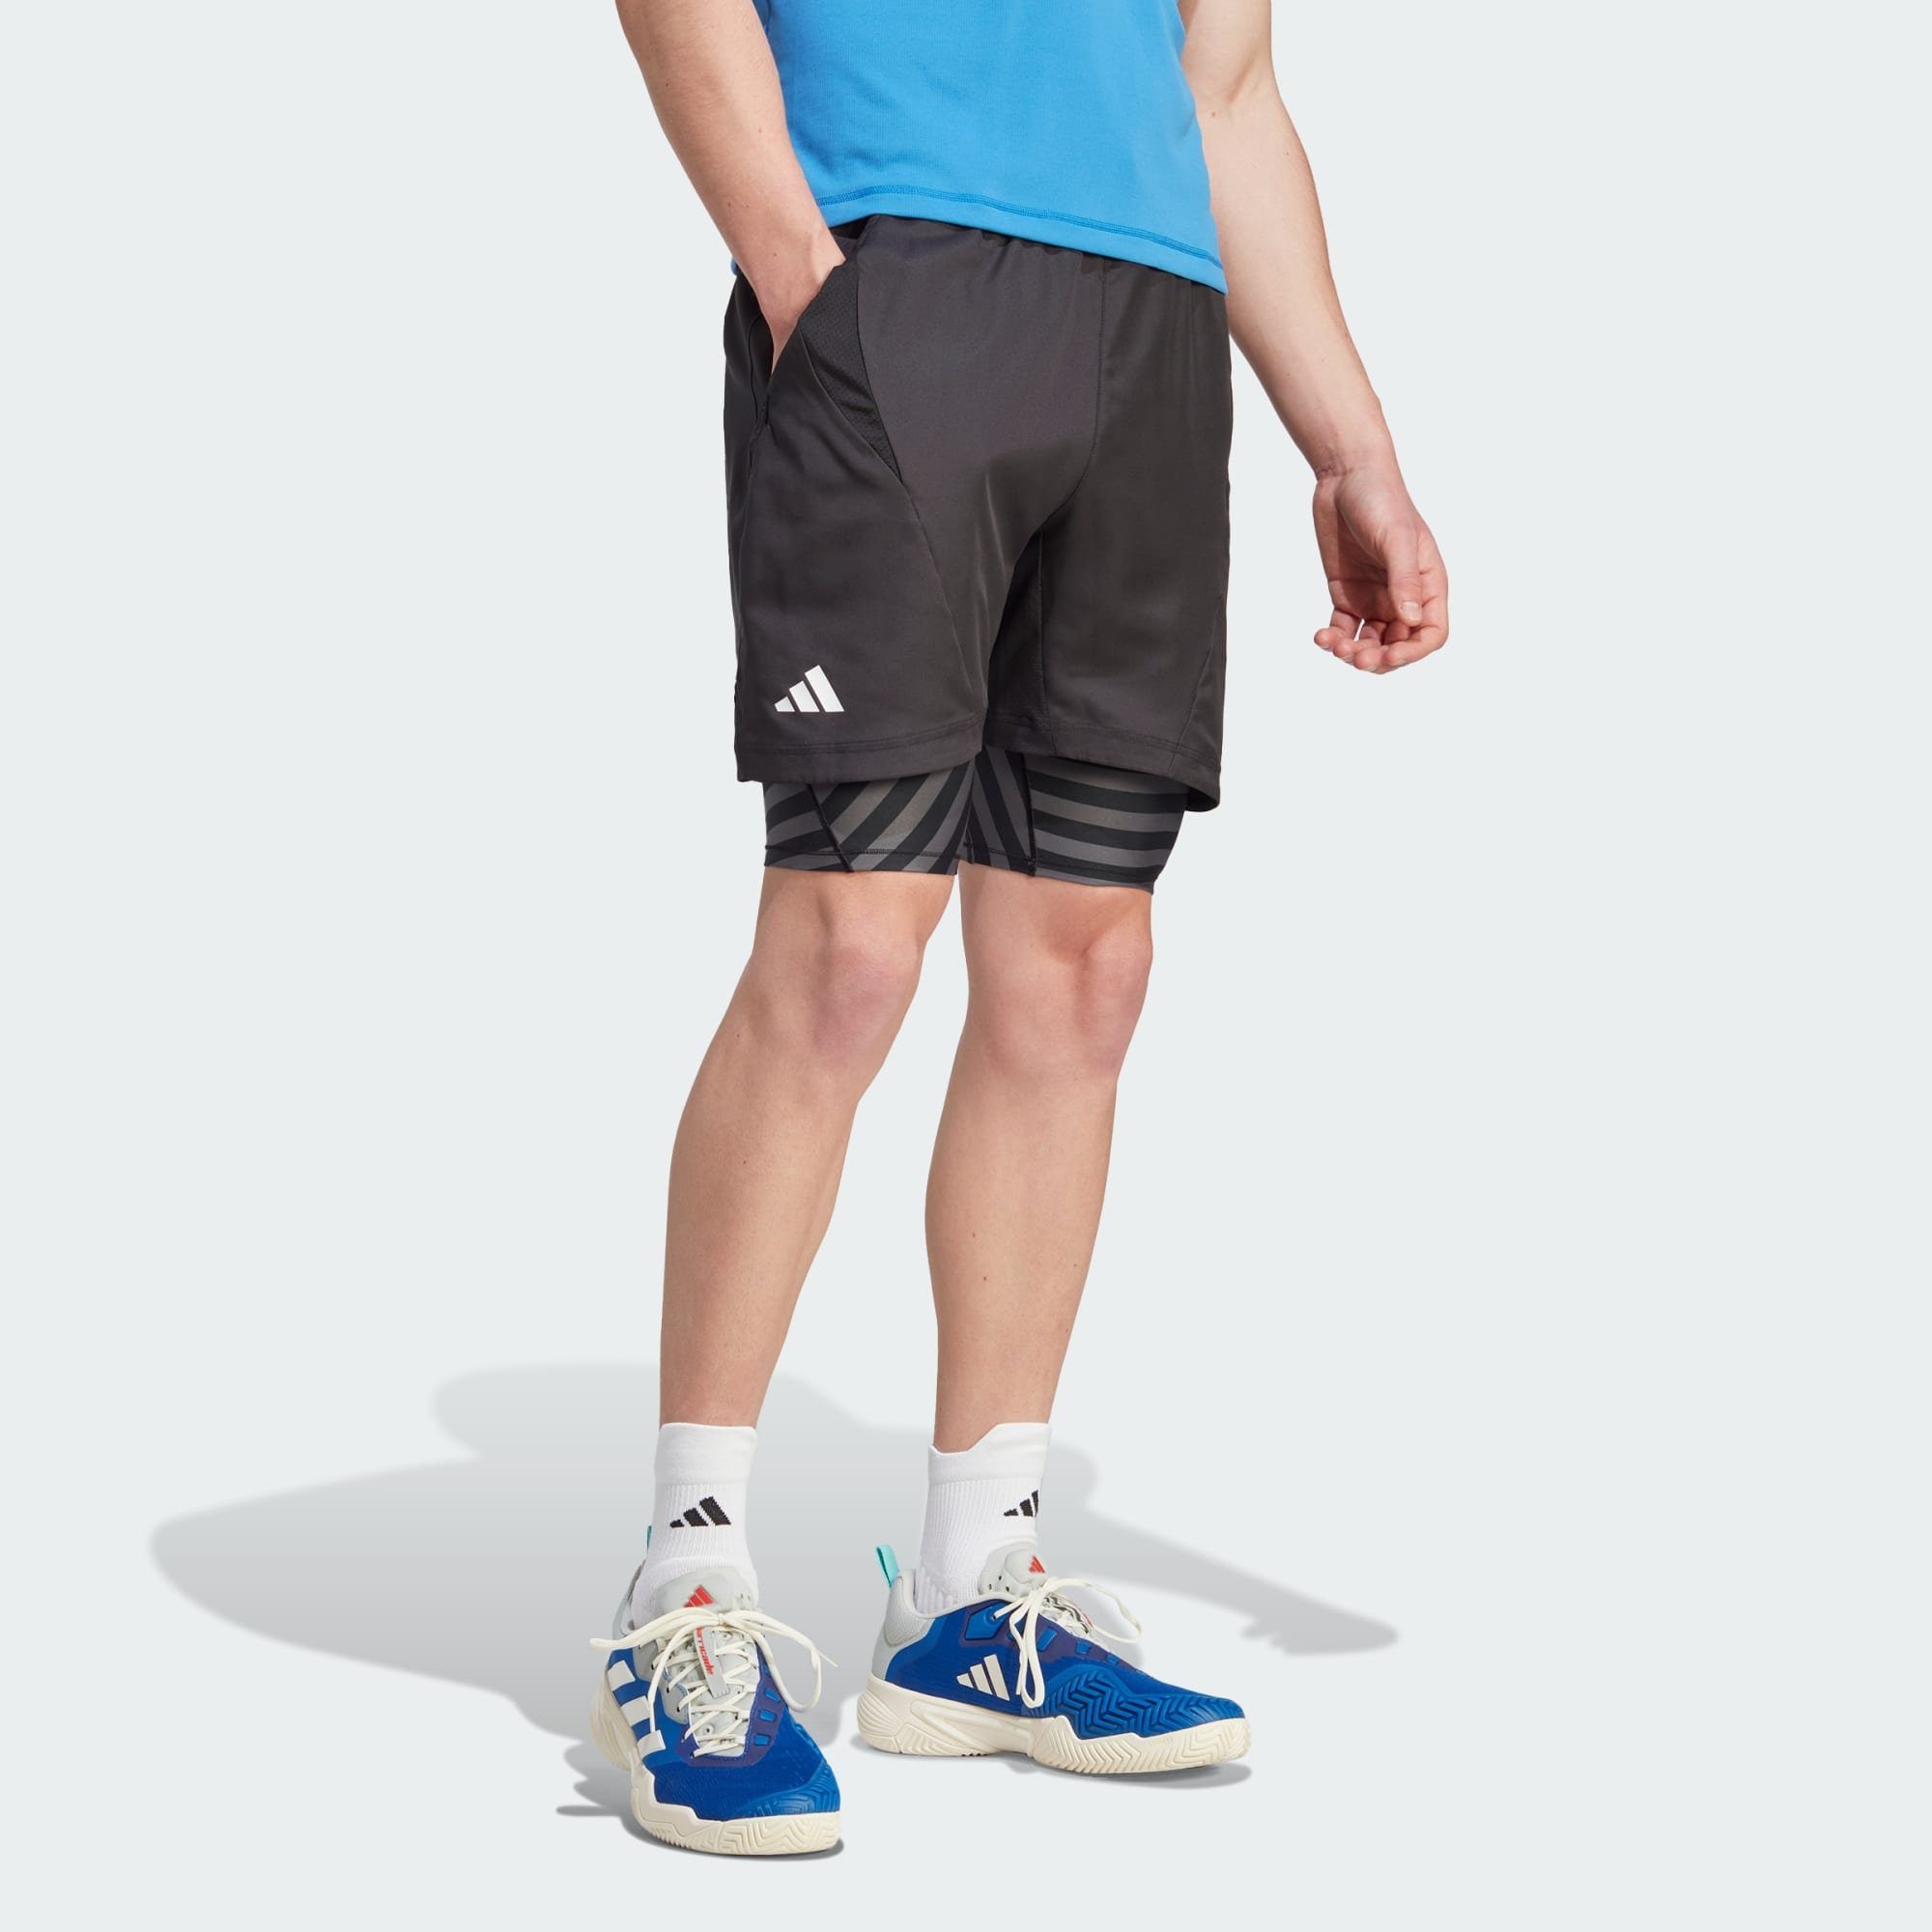 PRO AEROREADY Black Performance TENNIS TWO-IN-ONE Funktionsshorts SHORTS adidas